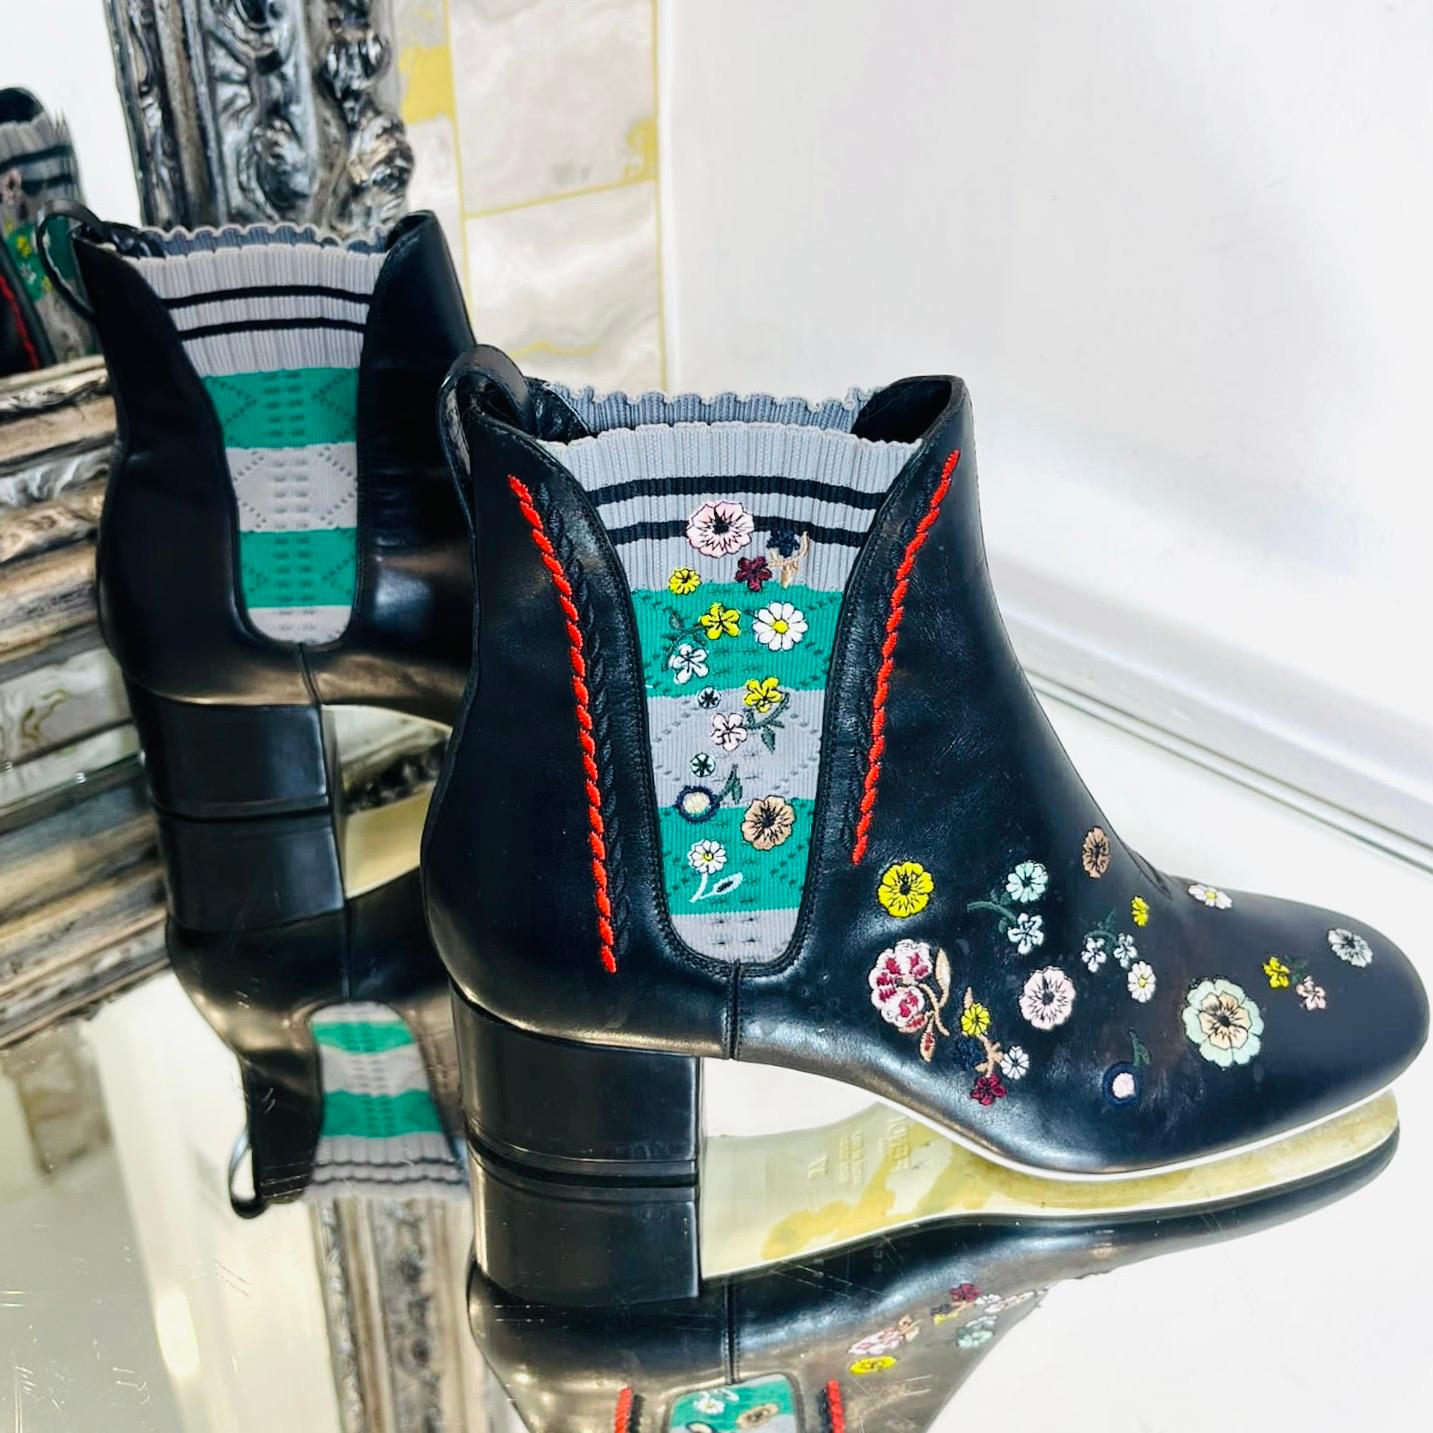 Fendi Floral Embroidered Leather Ankle Boots In Good Condition For Sale In London, GB